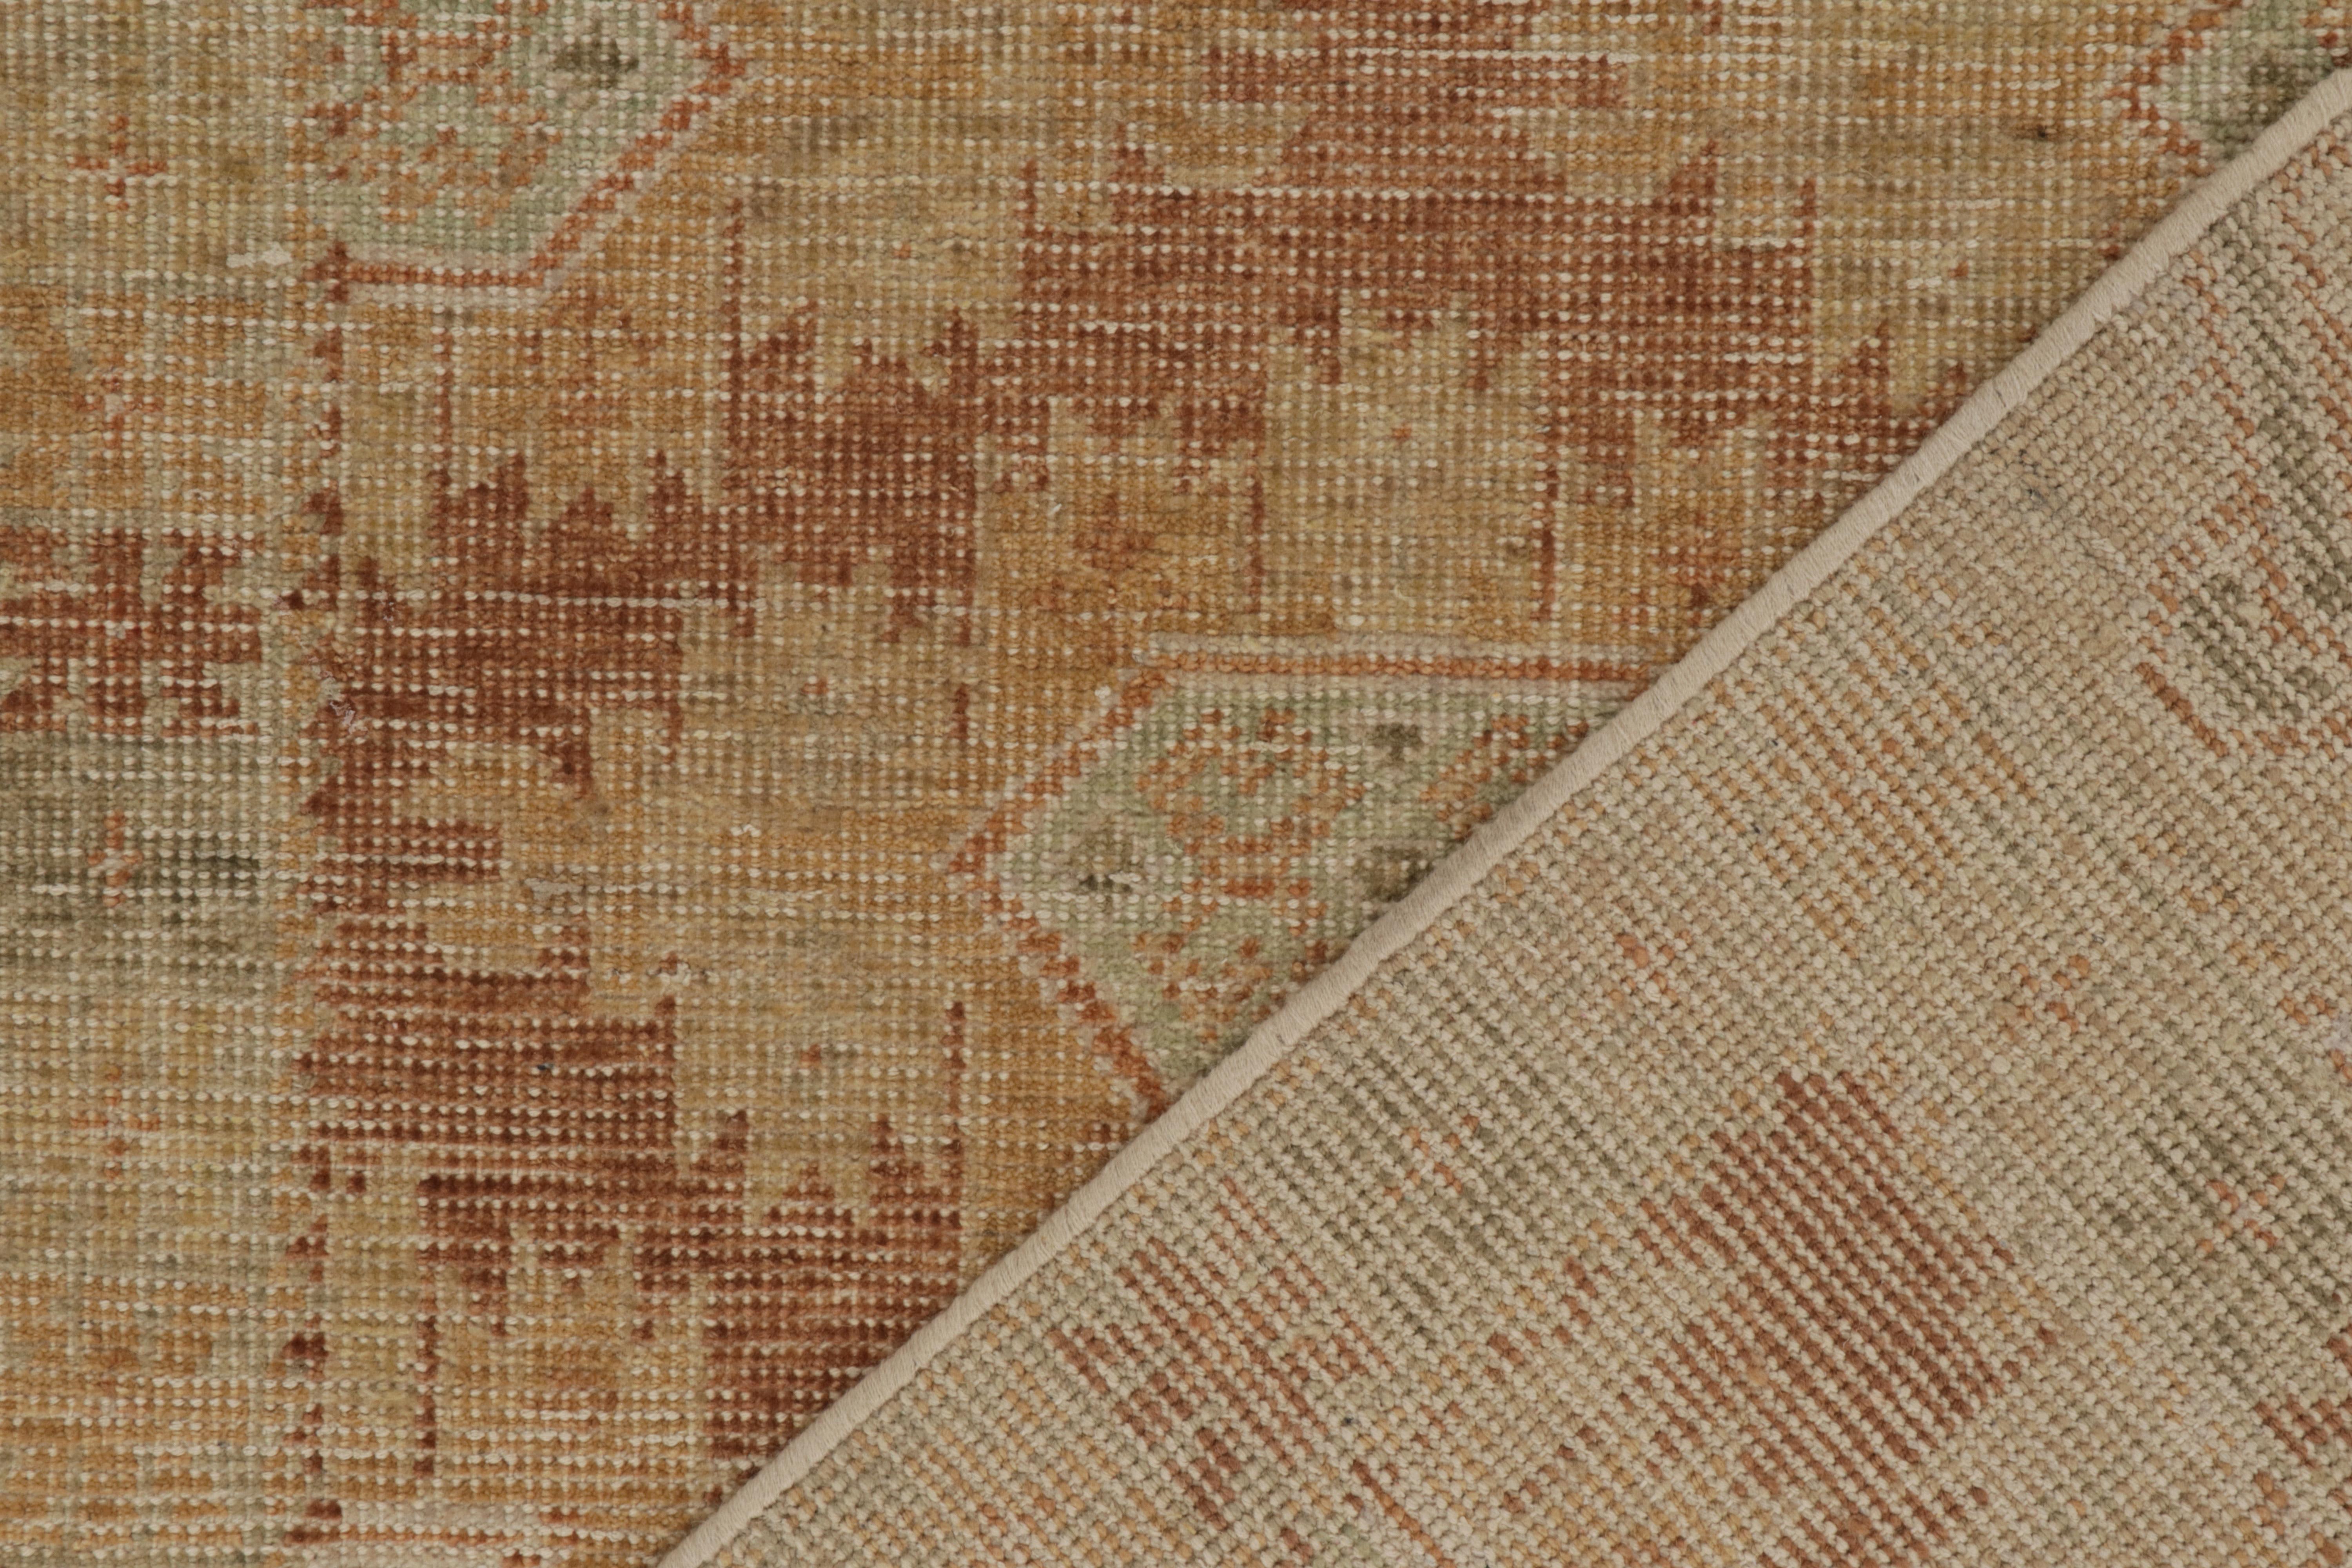 Rug & Kilim's Distressed Style Rug in Gold & Brown Geometric Pattern In New Condition For Sale In Long Island City, NY